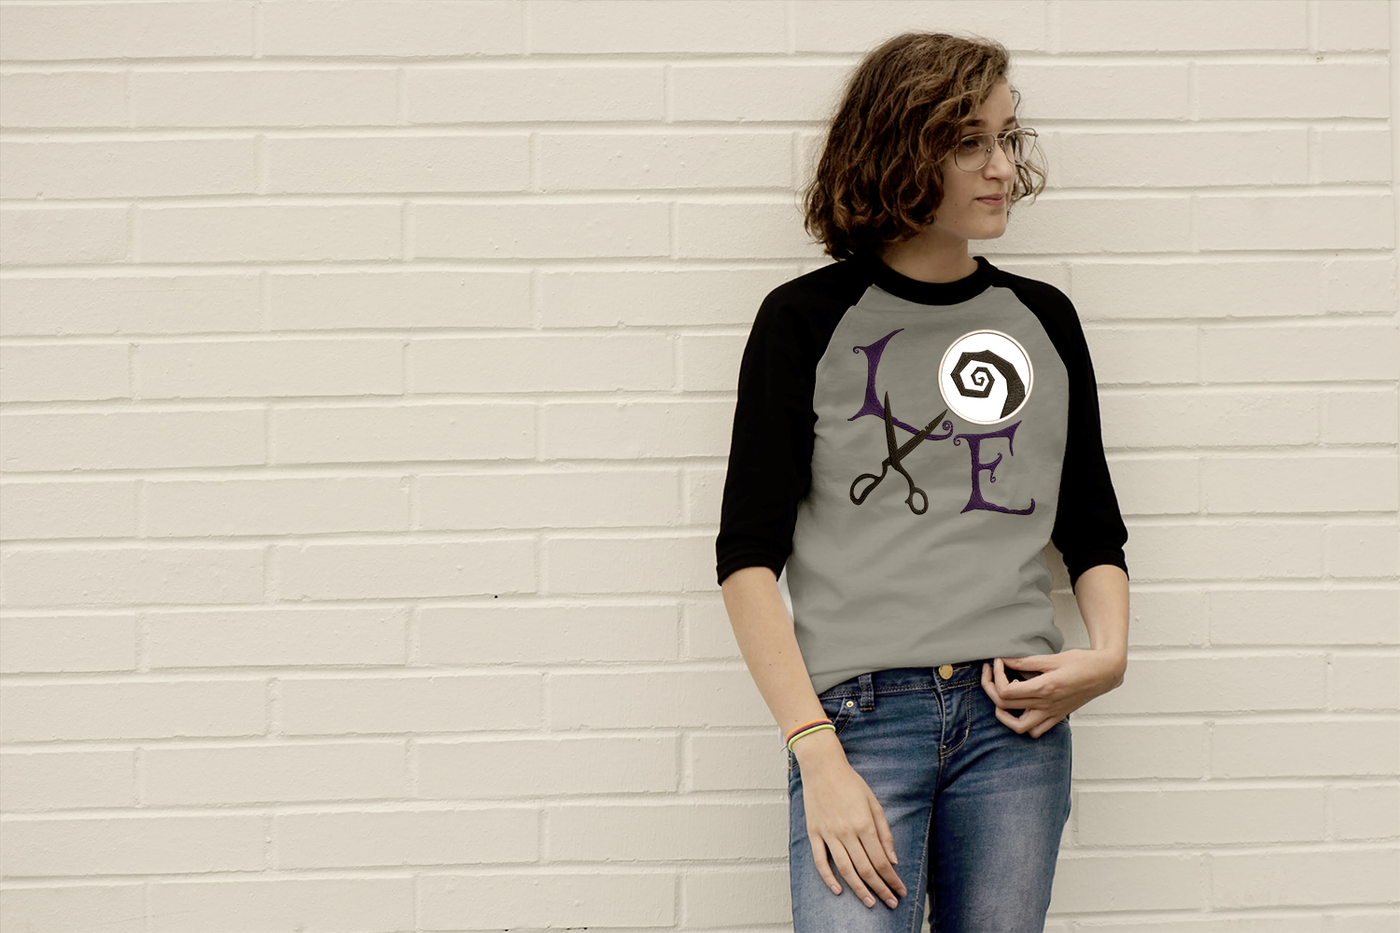 White-presenting teen girl wears a raglan tee with the applique word "LOVE" set on a square. The letters are in gothic style. In place of the O is a circle with a rough swirl embroidery. In place of the V are a pair of old scissors.